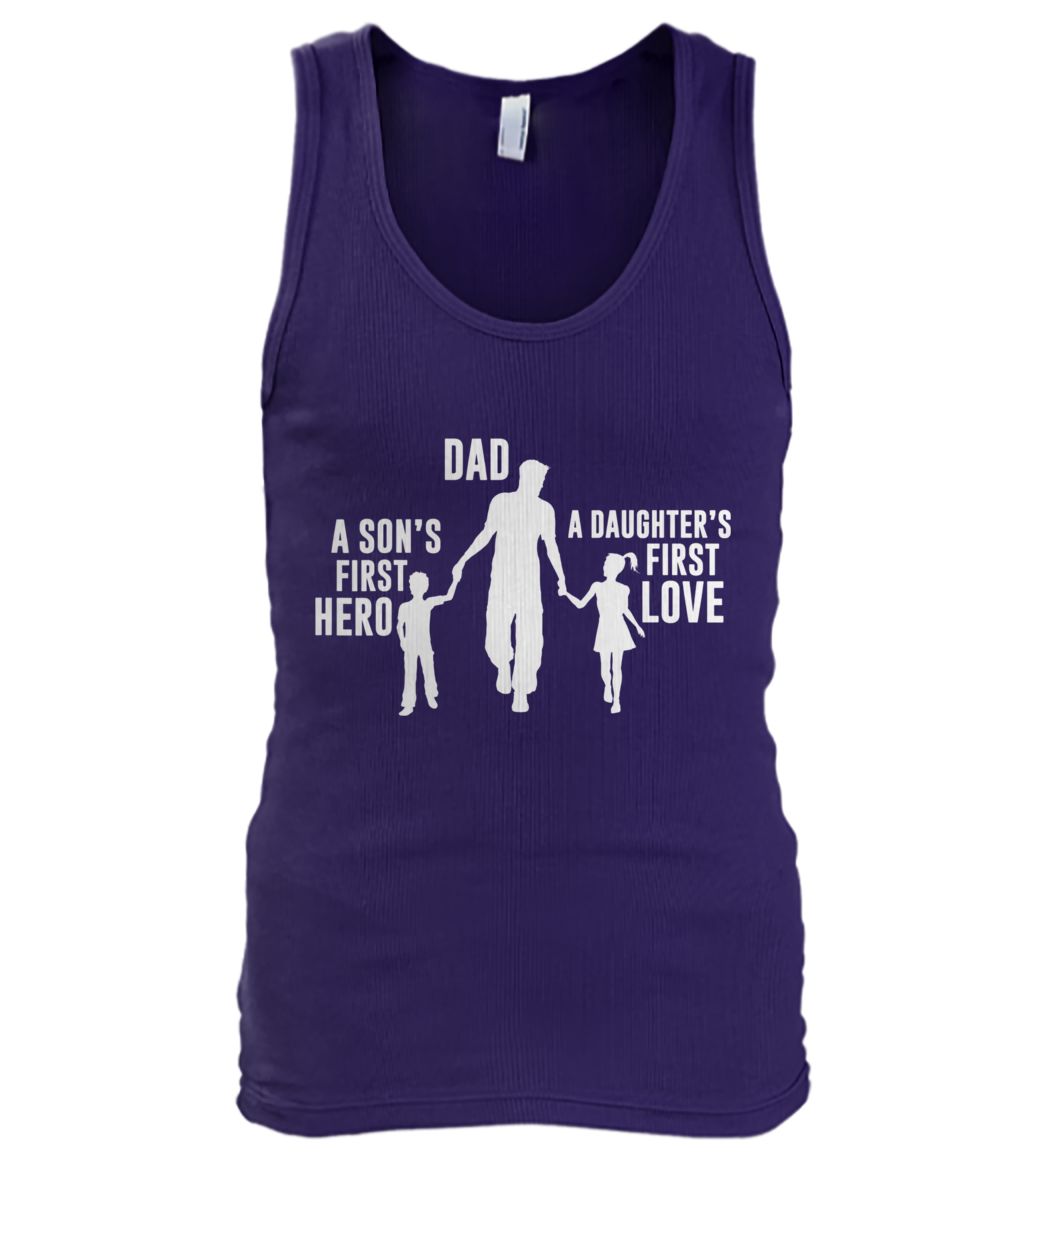 Dad a son's first hero a daughter's first love men's tank top